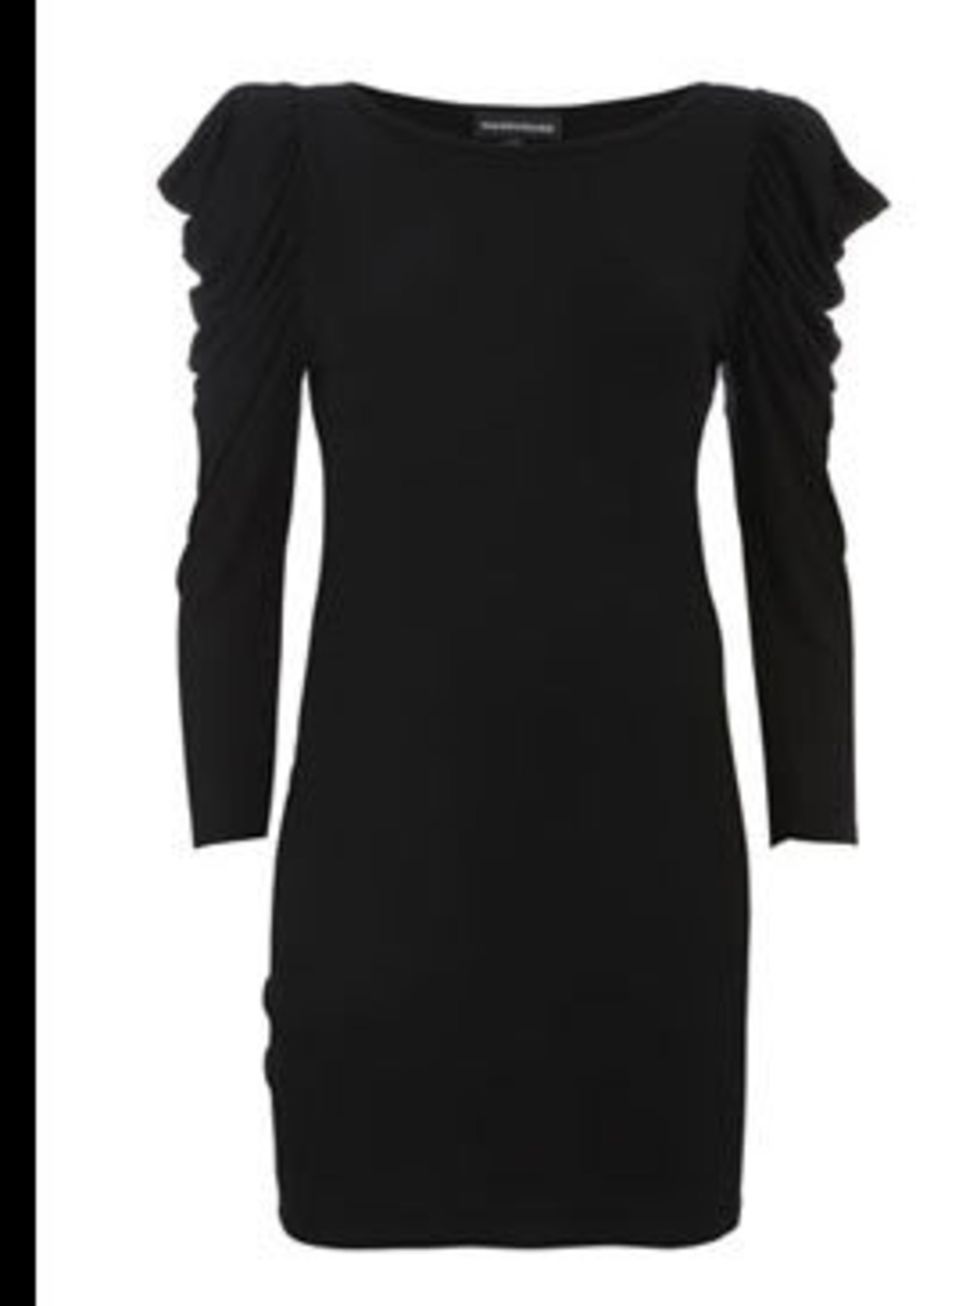 <p>Dress, £28 by <a href="http://www.warehouse.co.uk/fcp/product/fashion//SCULPTURED-SLEEVE-DRESS/12588">Warehouse</a></p>